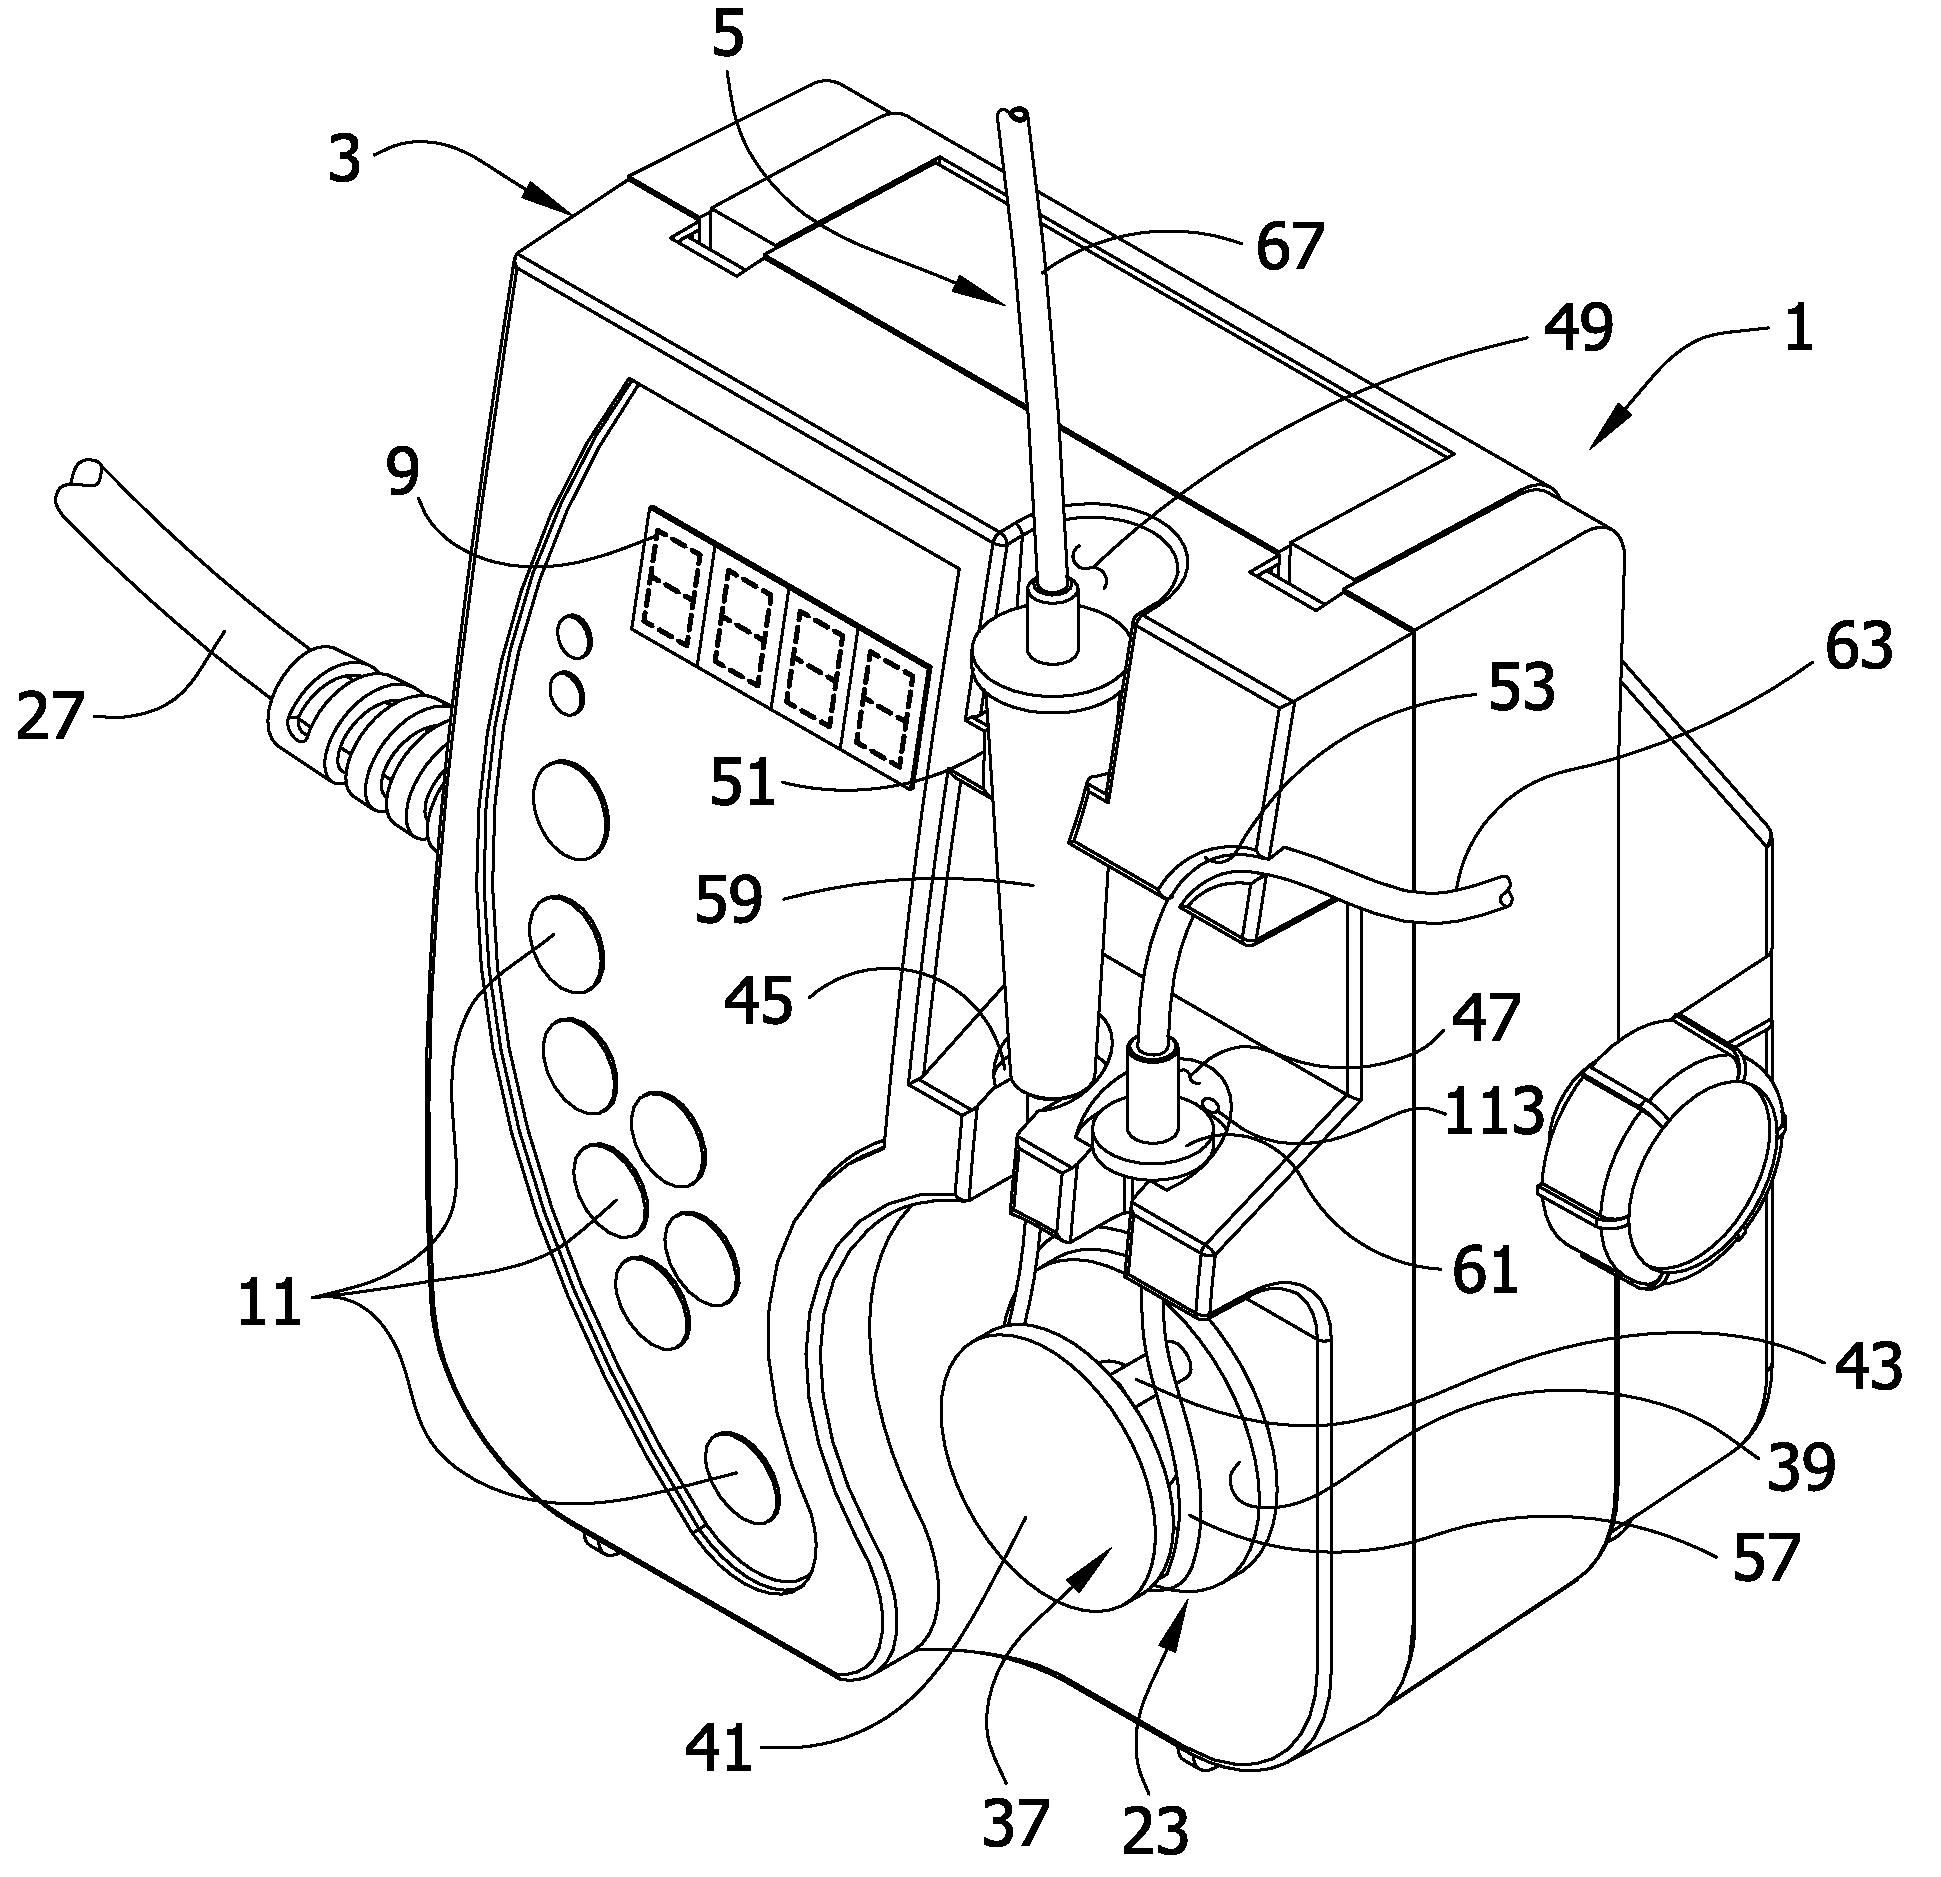 Pump set and pump with electromagnetic radiation operated interlock